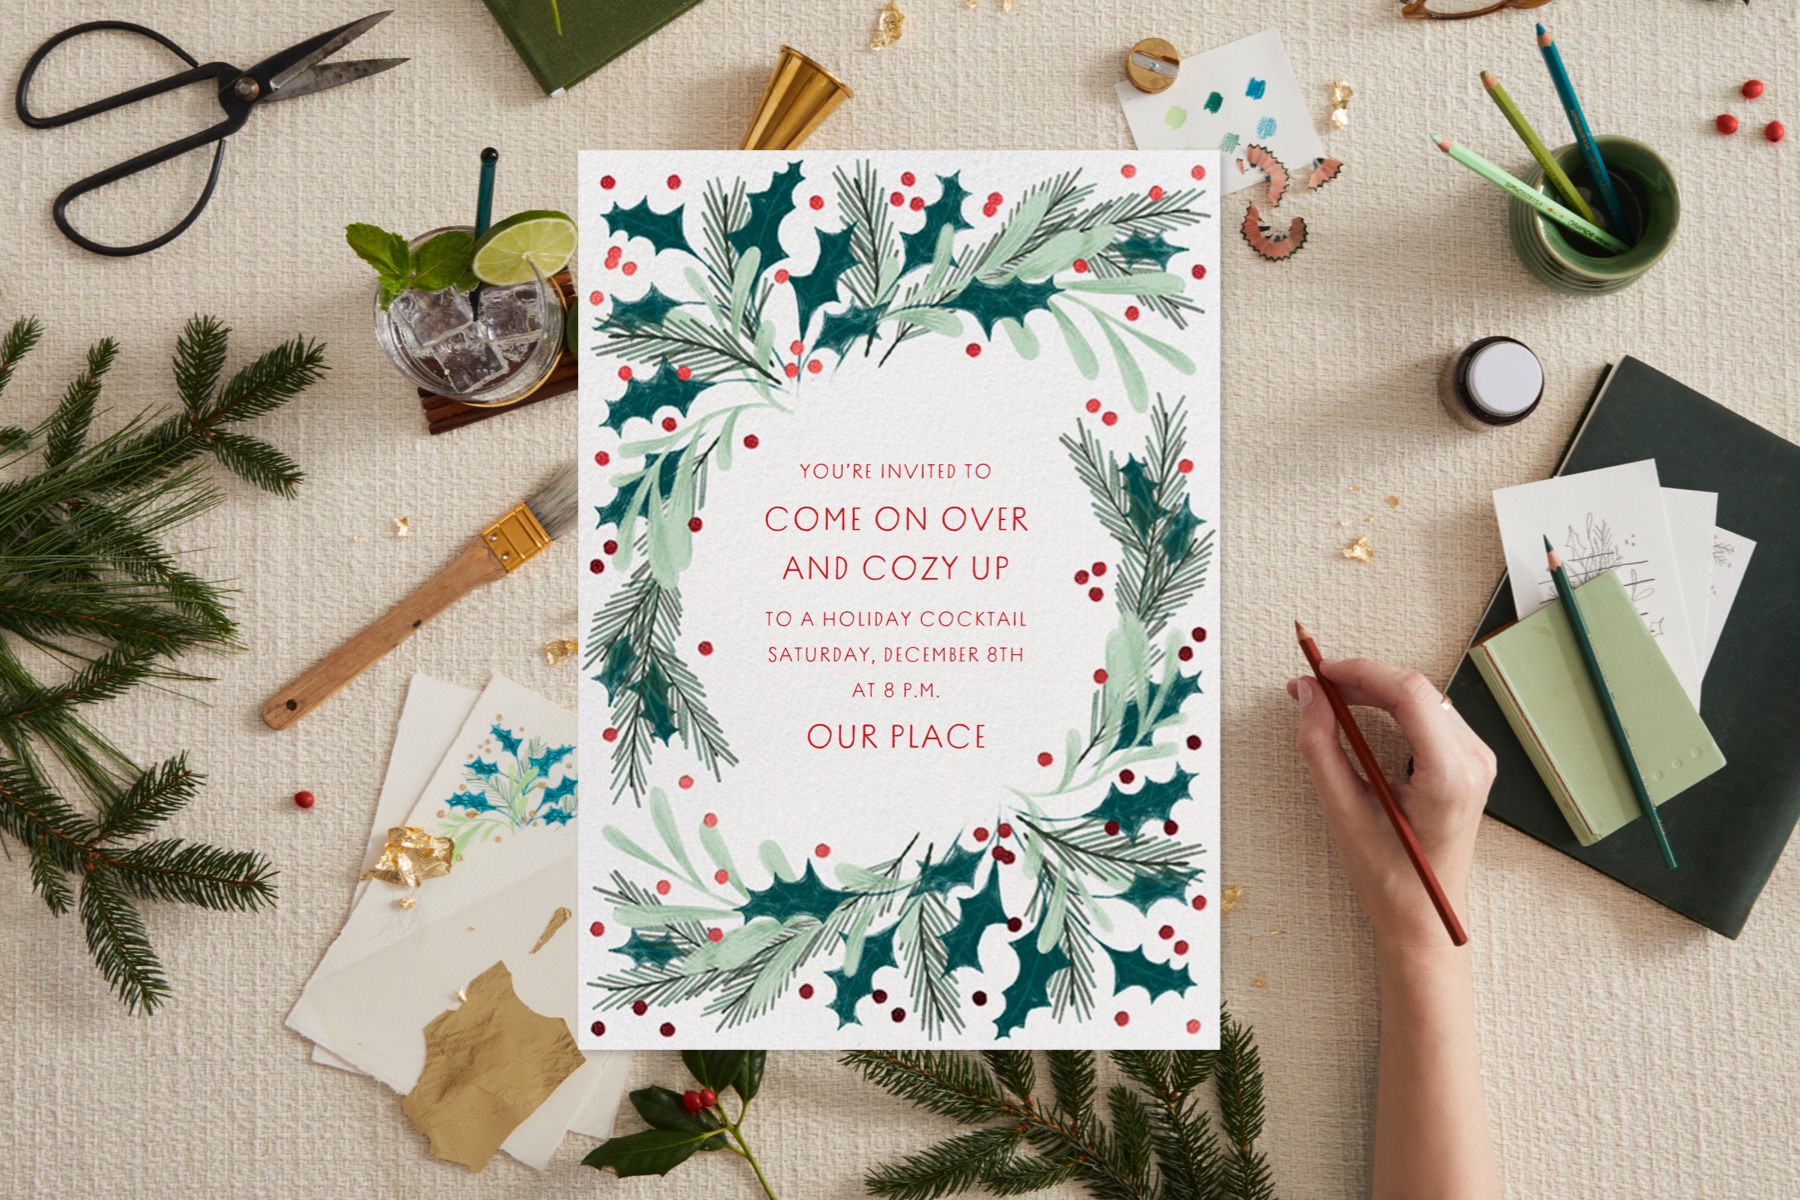 A holiday invitation featuring a wreath design surrounded by a scene with the designer’s inspiration items, like greenery, gold foil, and colored pencils. 